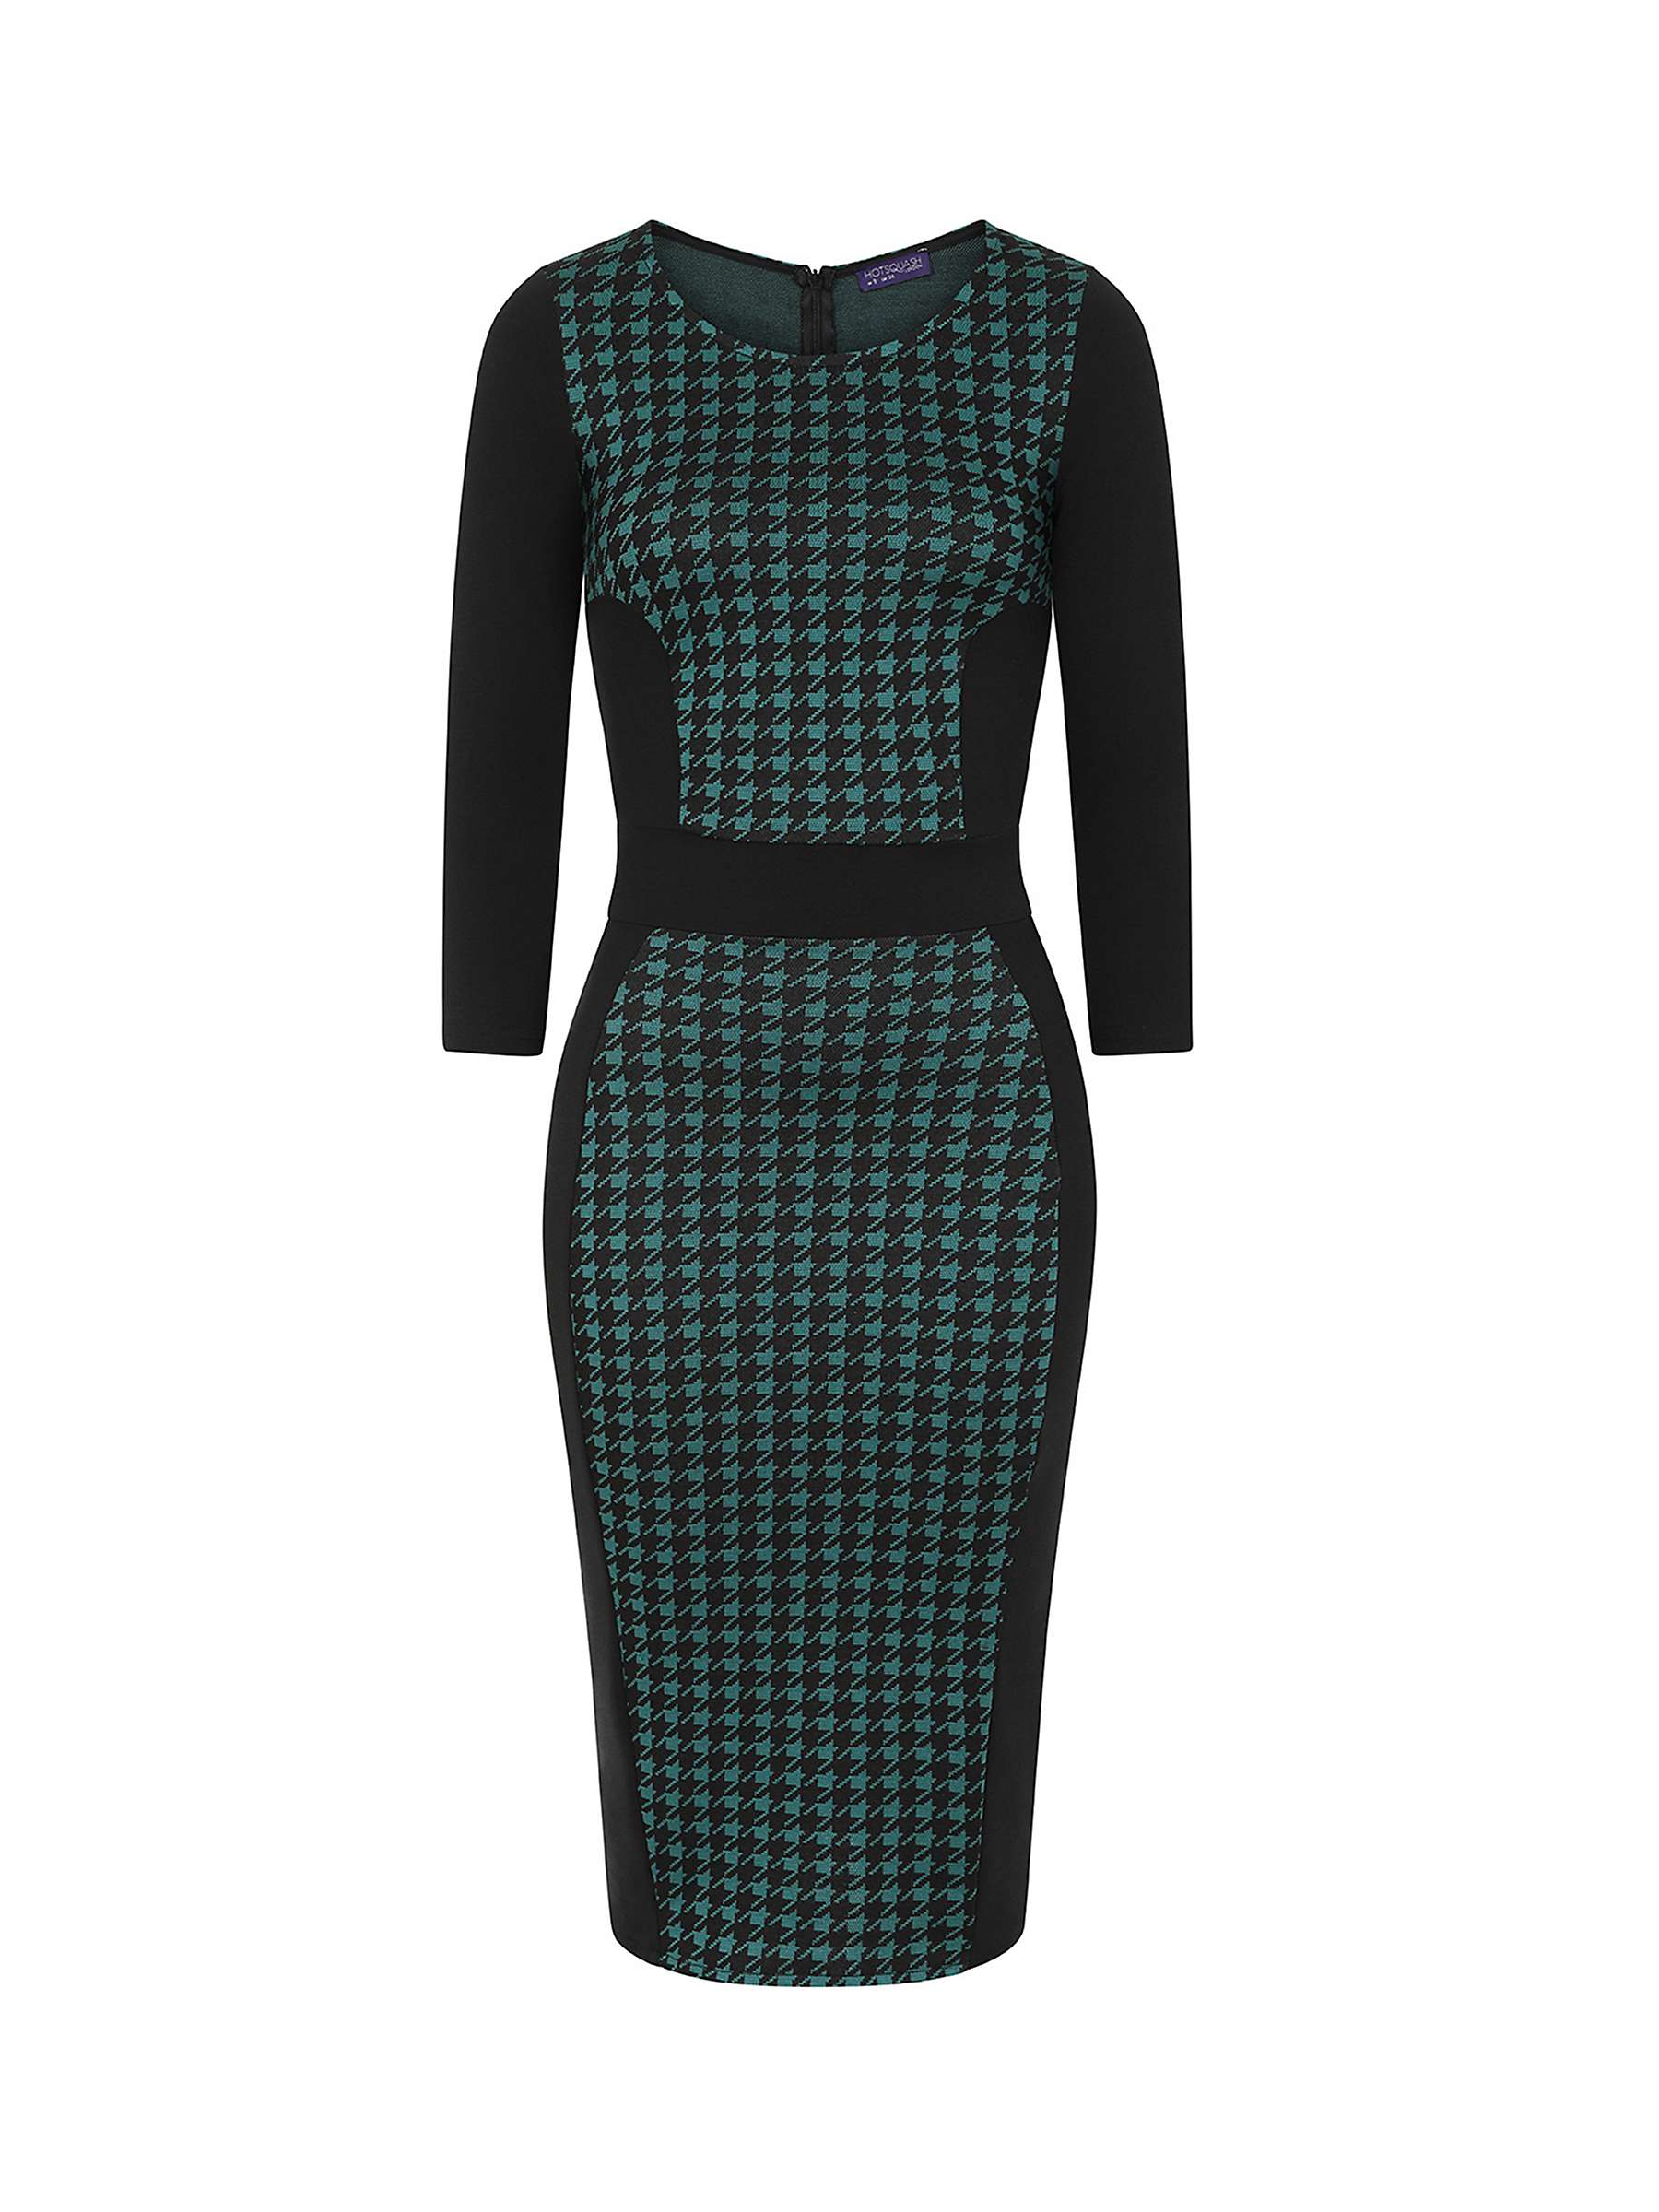 Buy HotSquash Bodycon Ponte Dress, Green Houndstooth Online at johnlewis.com